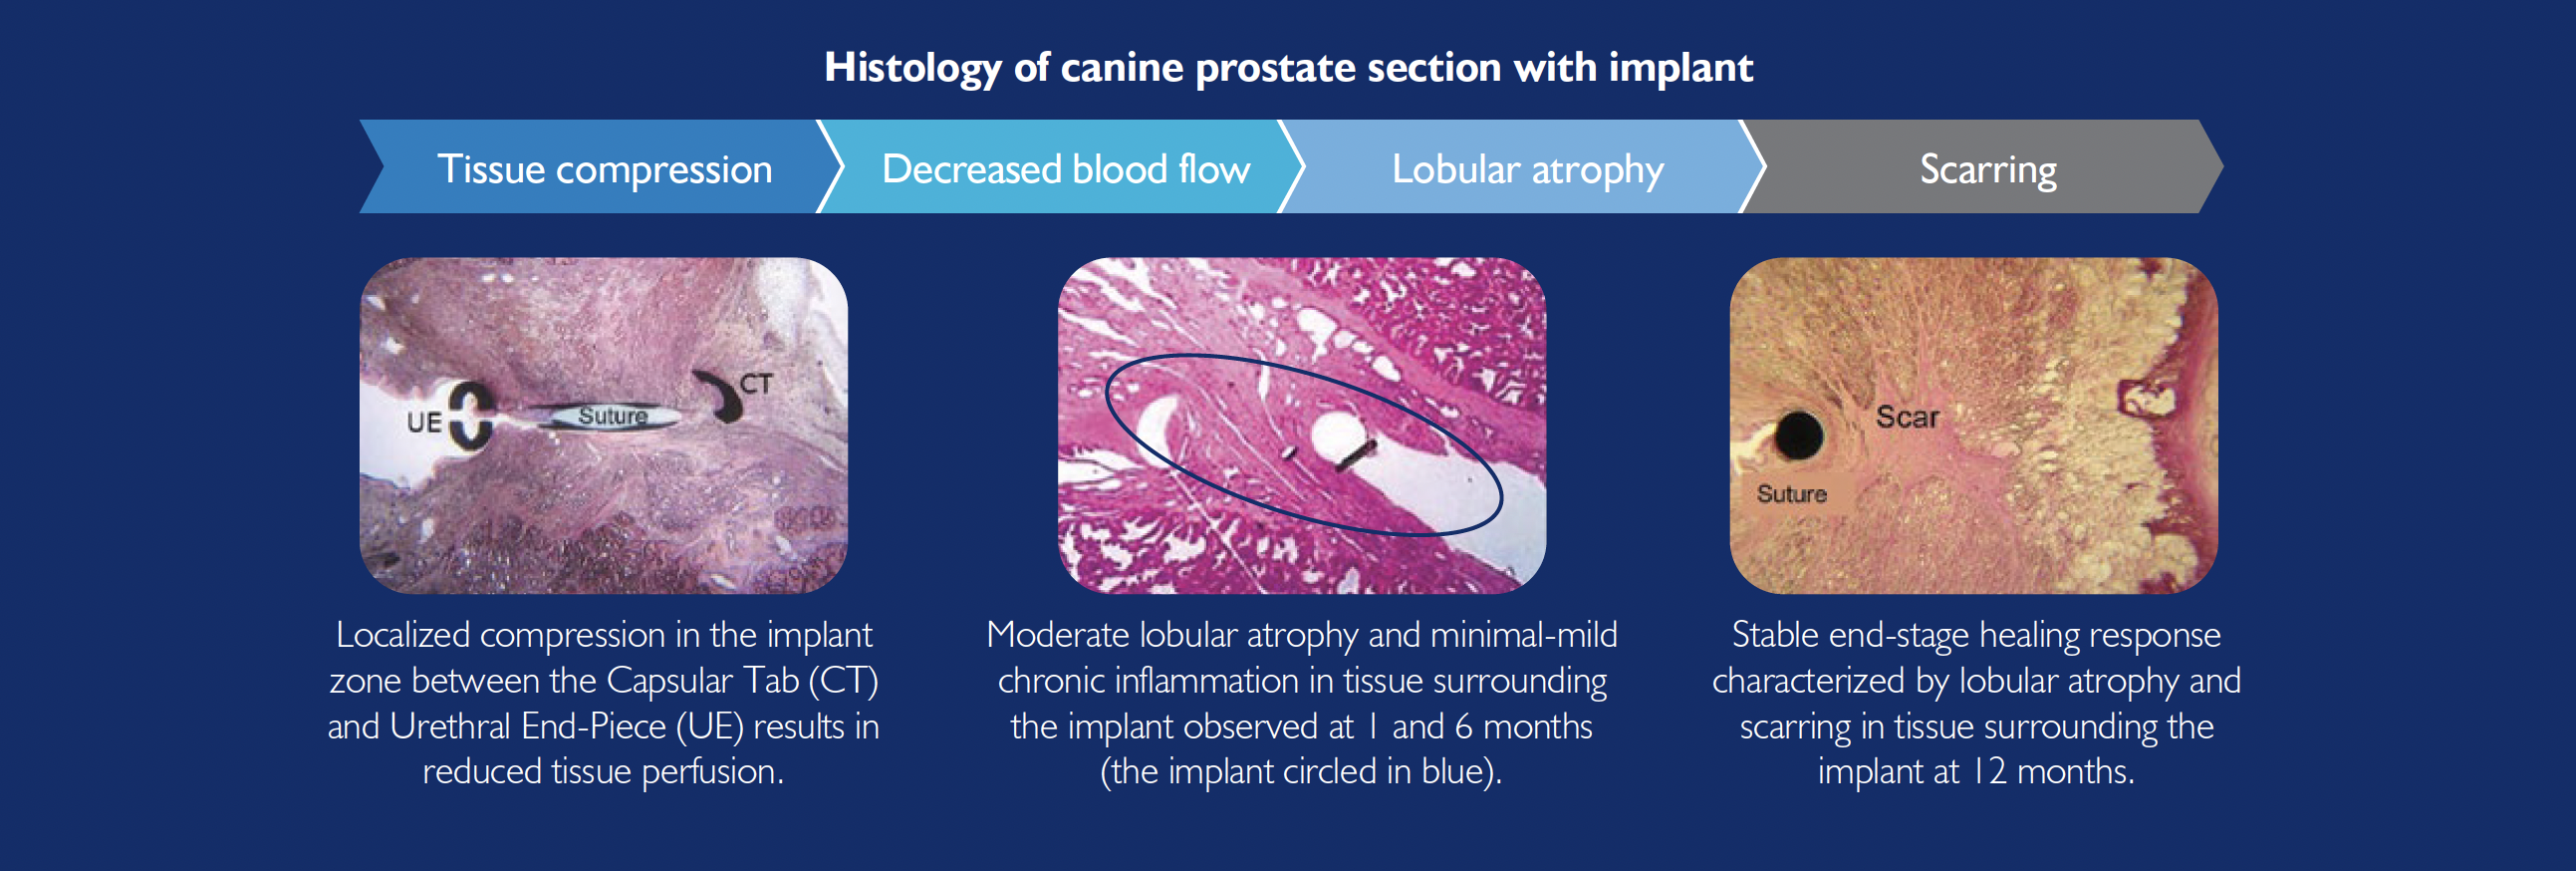 Histology of canine prostate section with implant